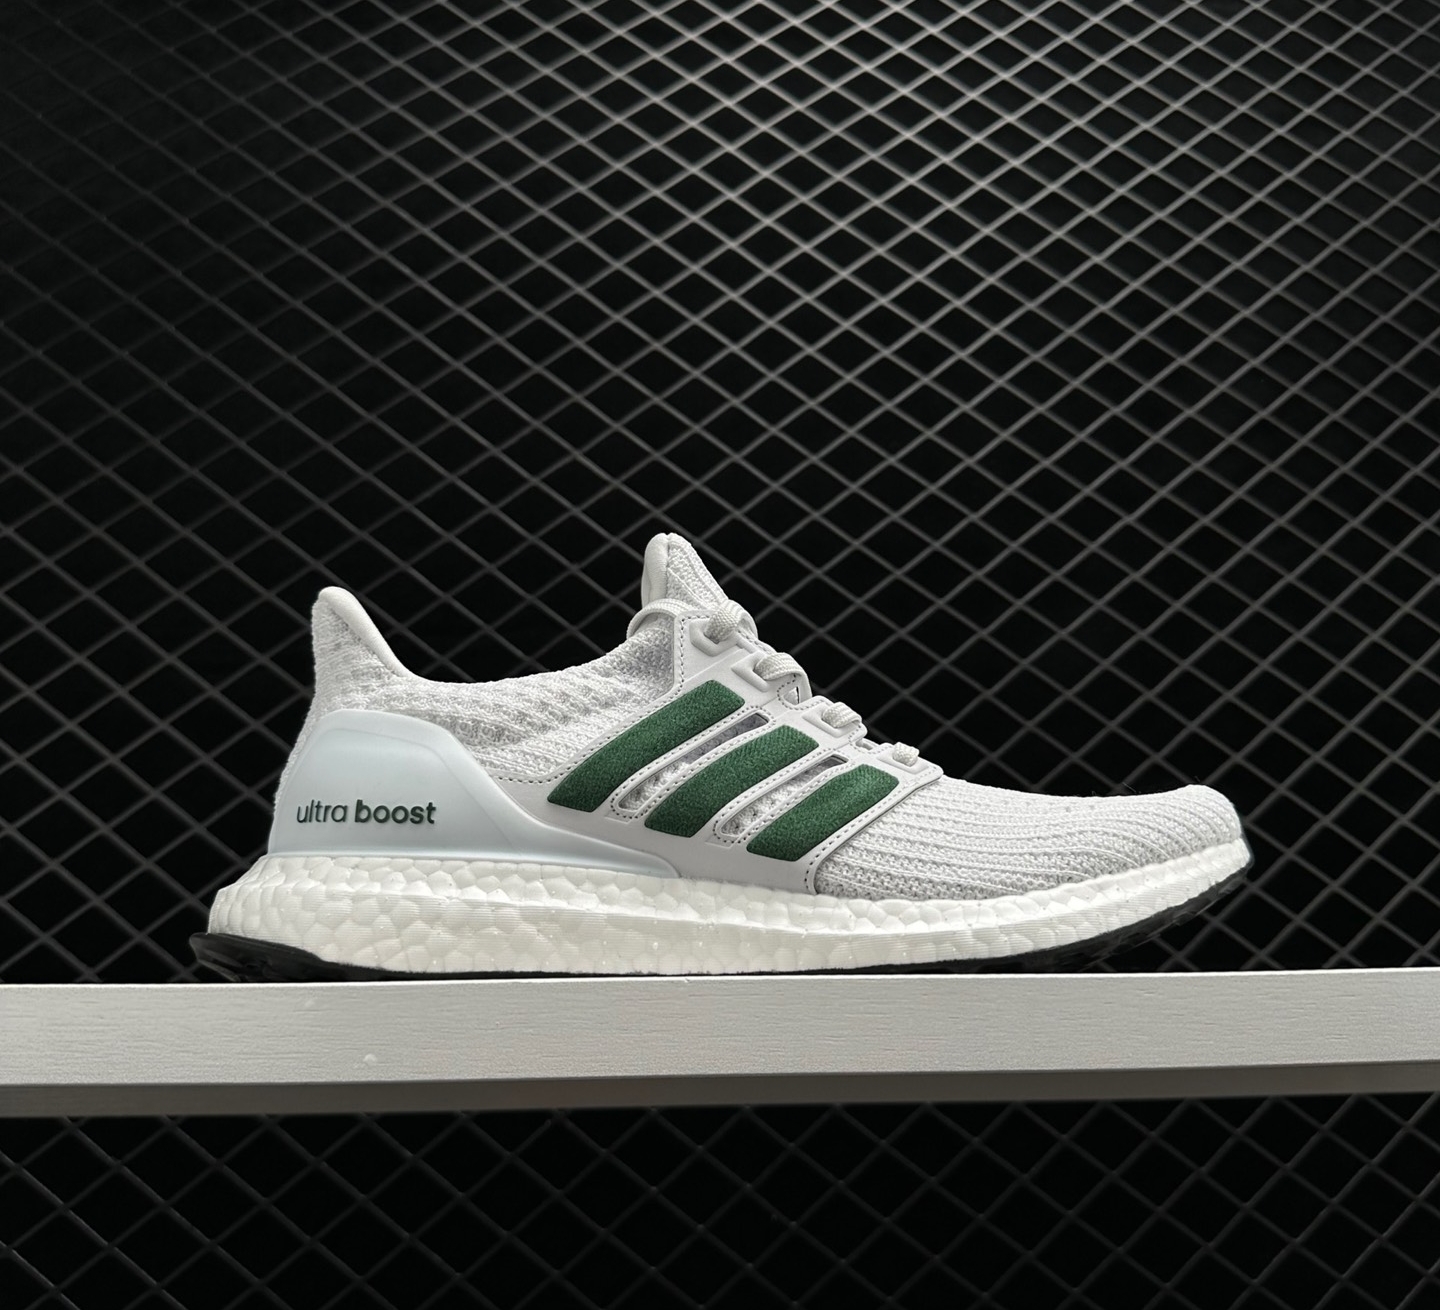 Adidas UltraBoost 4.0 DNA 'White Green' FY9338 - Stylish and Comfortable Footwear